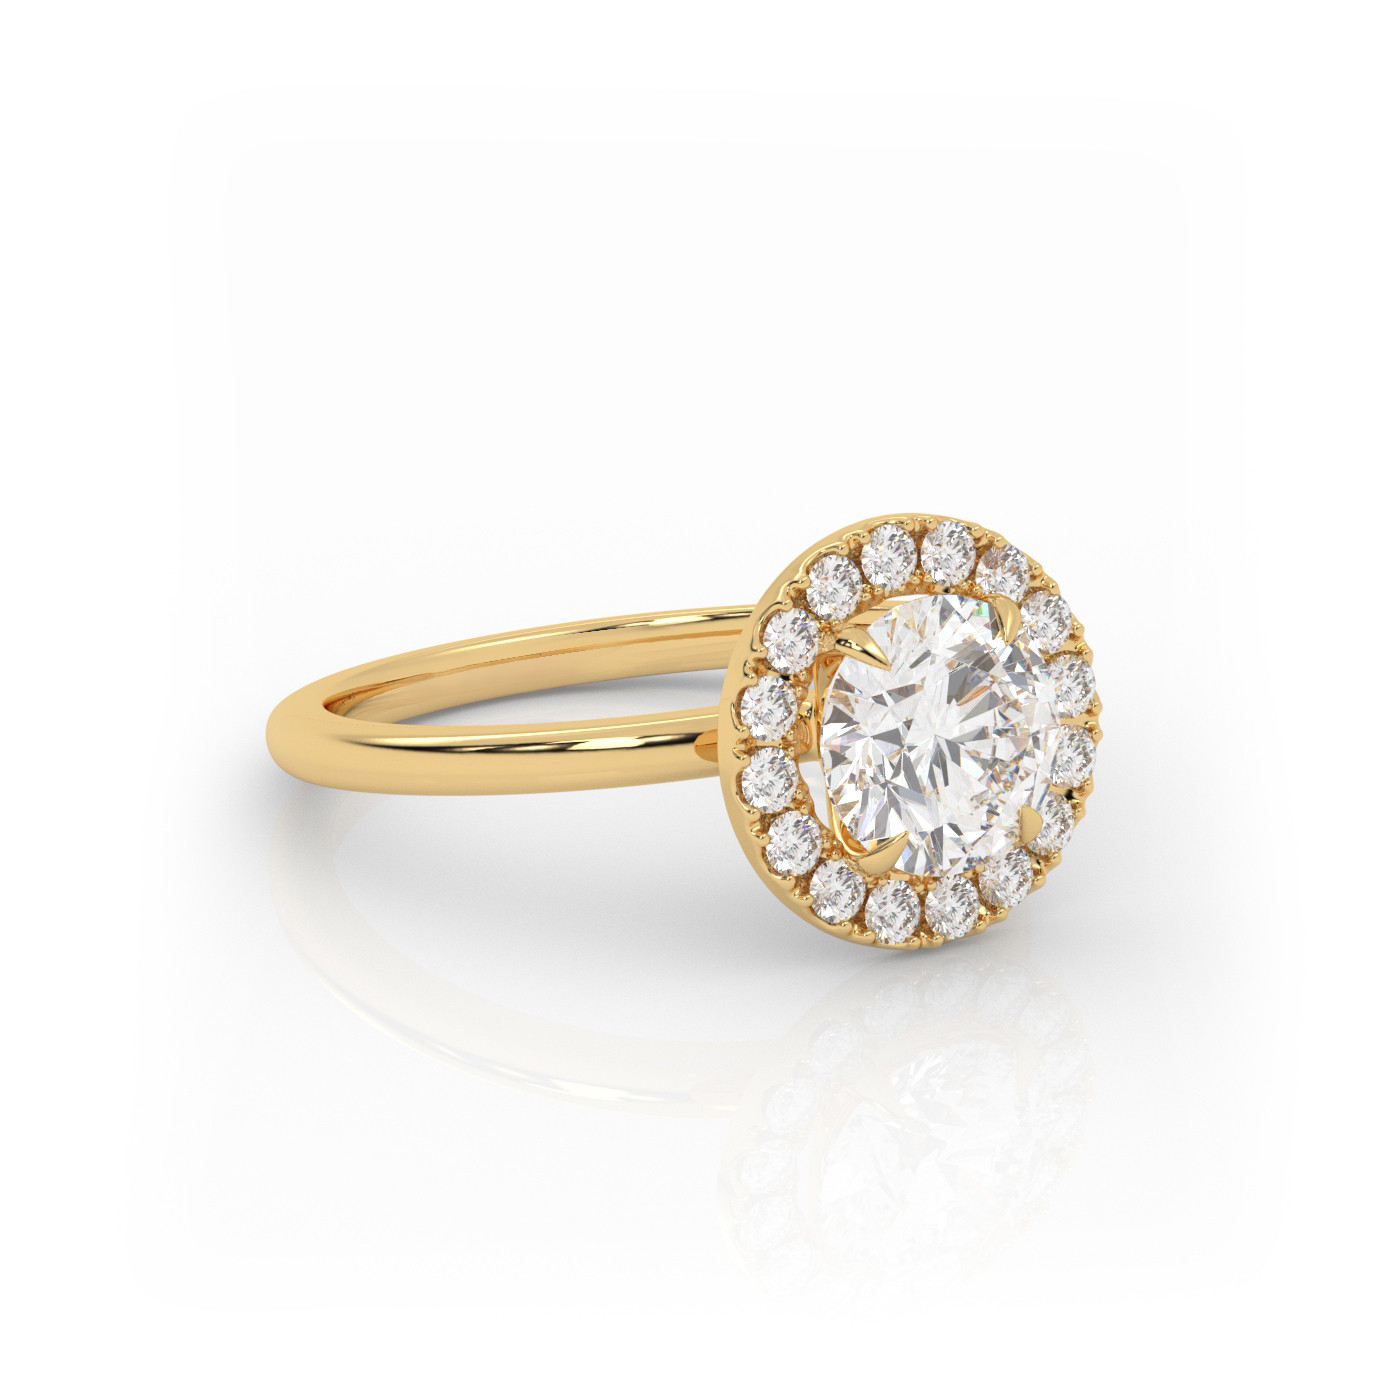 18K YELLOW GOLD Round Diamond Cut Engagement Ring with Halo Style